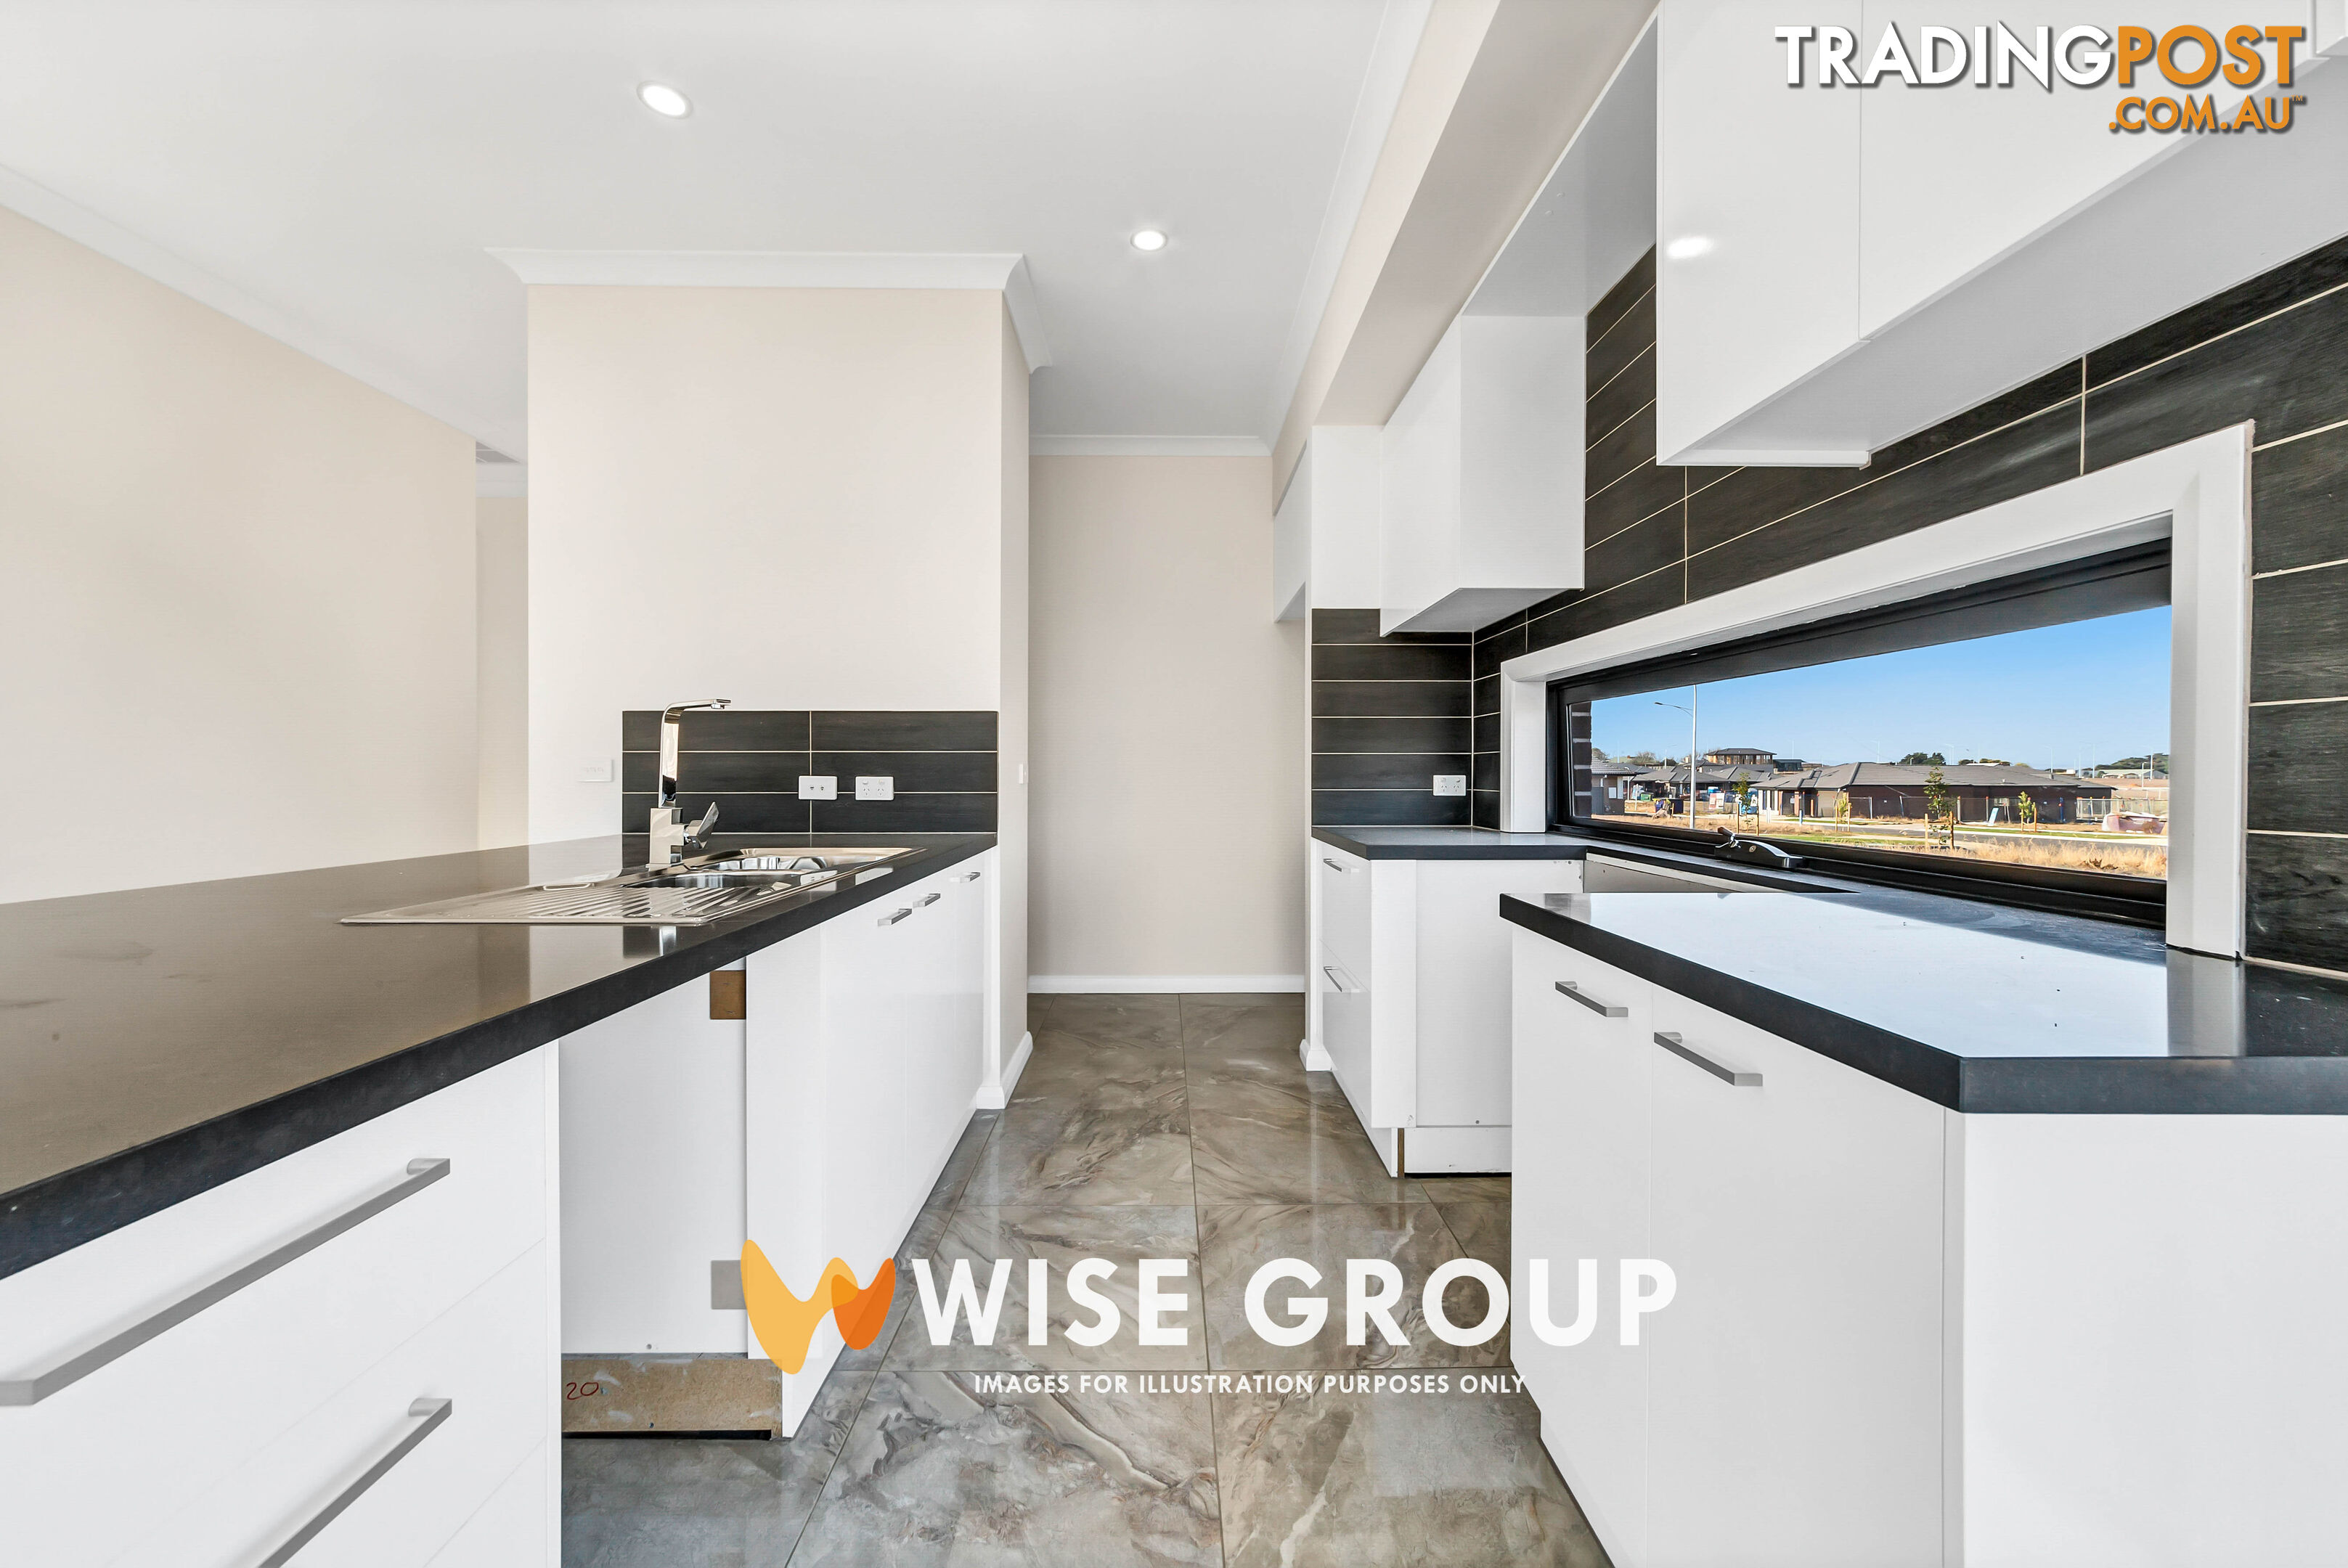 22 Mississipi Avenue CLYDE VIC 3978